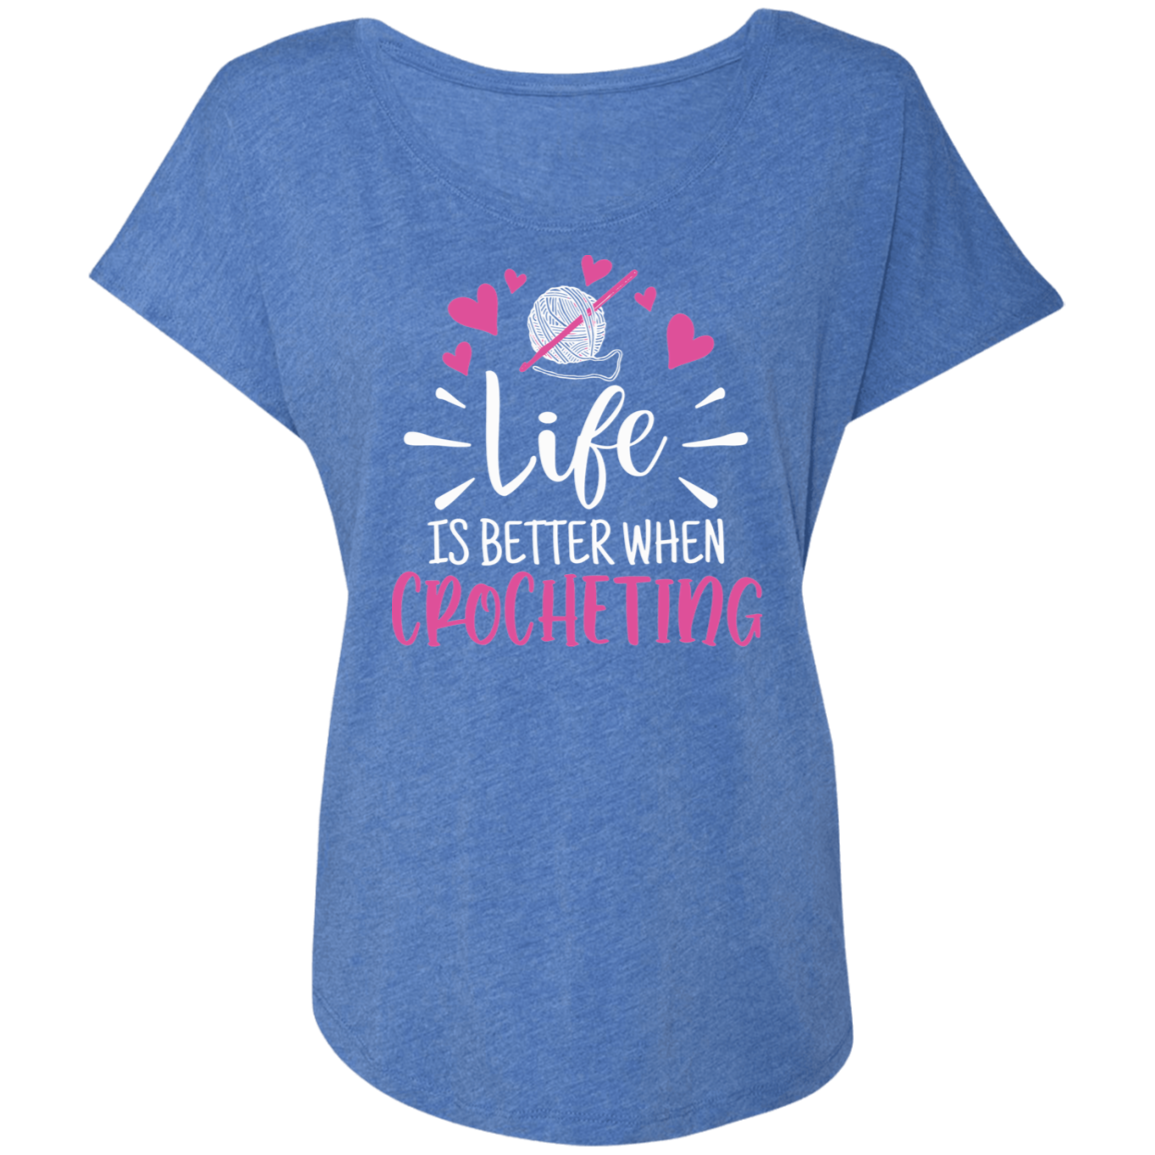 Life is Better when Crocheting Ladies' Triblend Dolman Sleeve